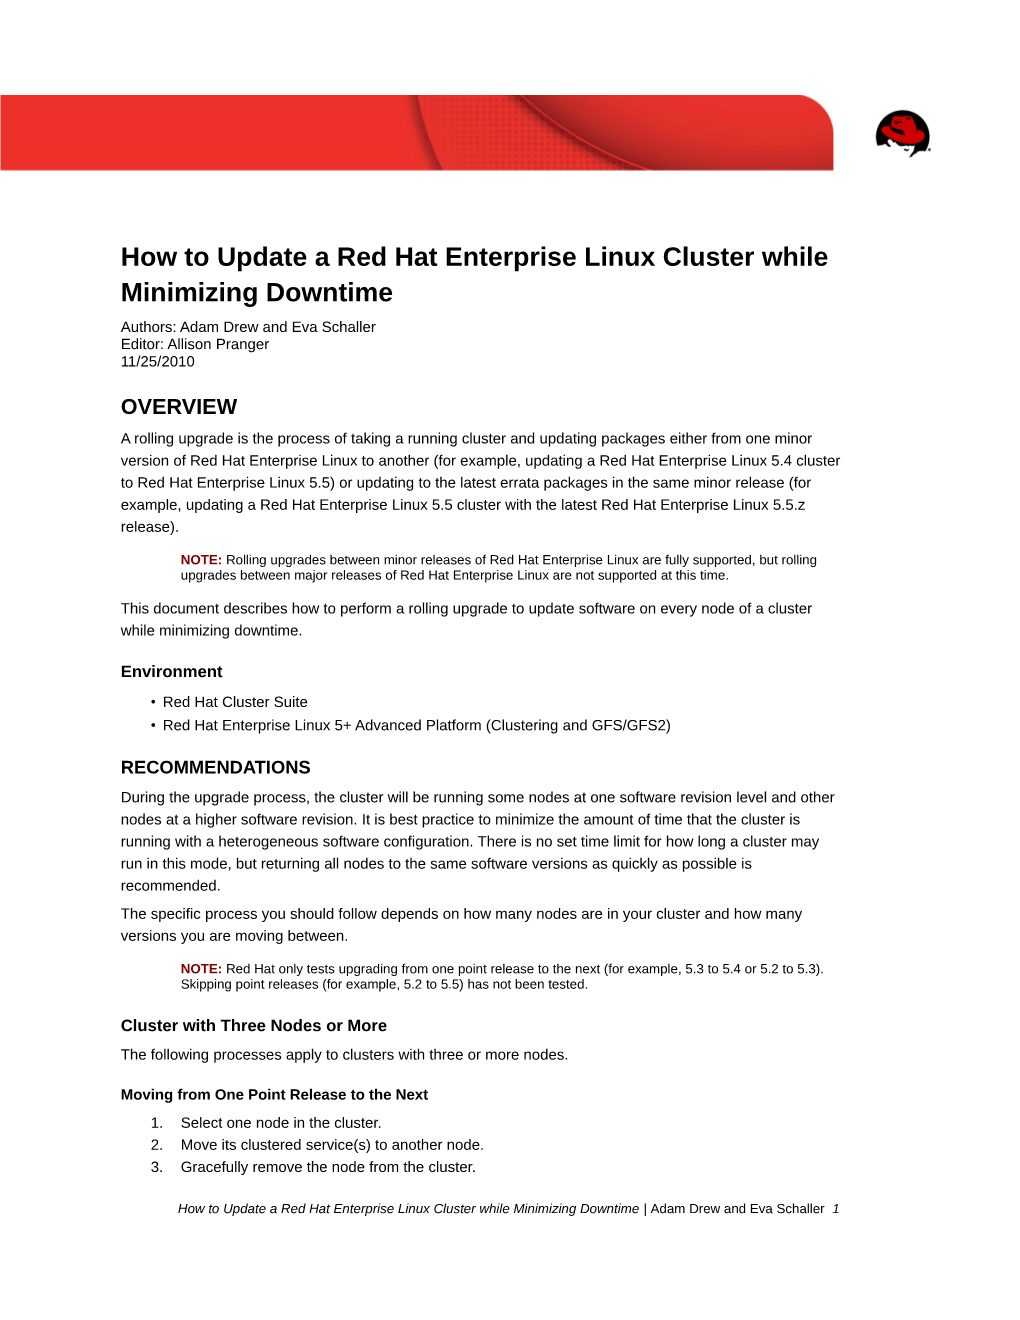 How to Update a Red Hat Enterprise Linux Cluster While Minimizing Downtime Authors: Adam Drew and Eva Schaller Editor: Allison Pranger 11/25/2010